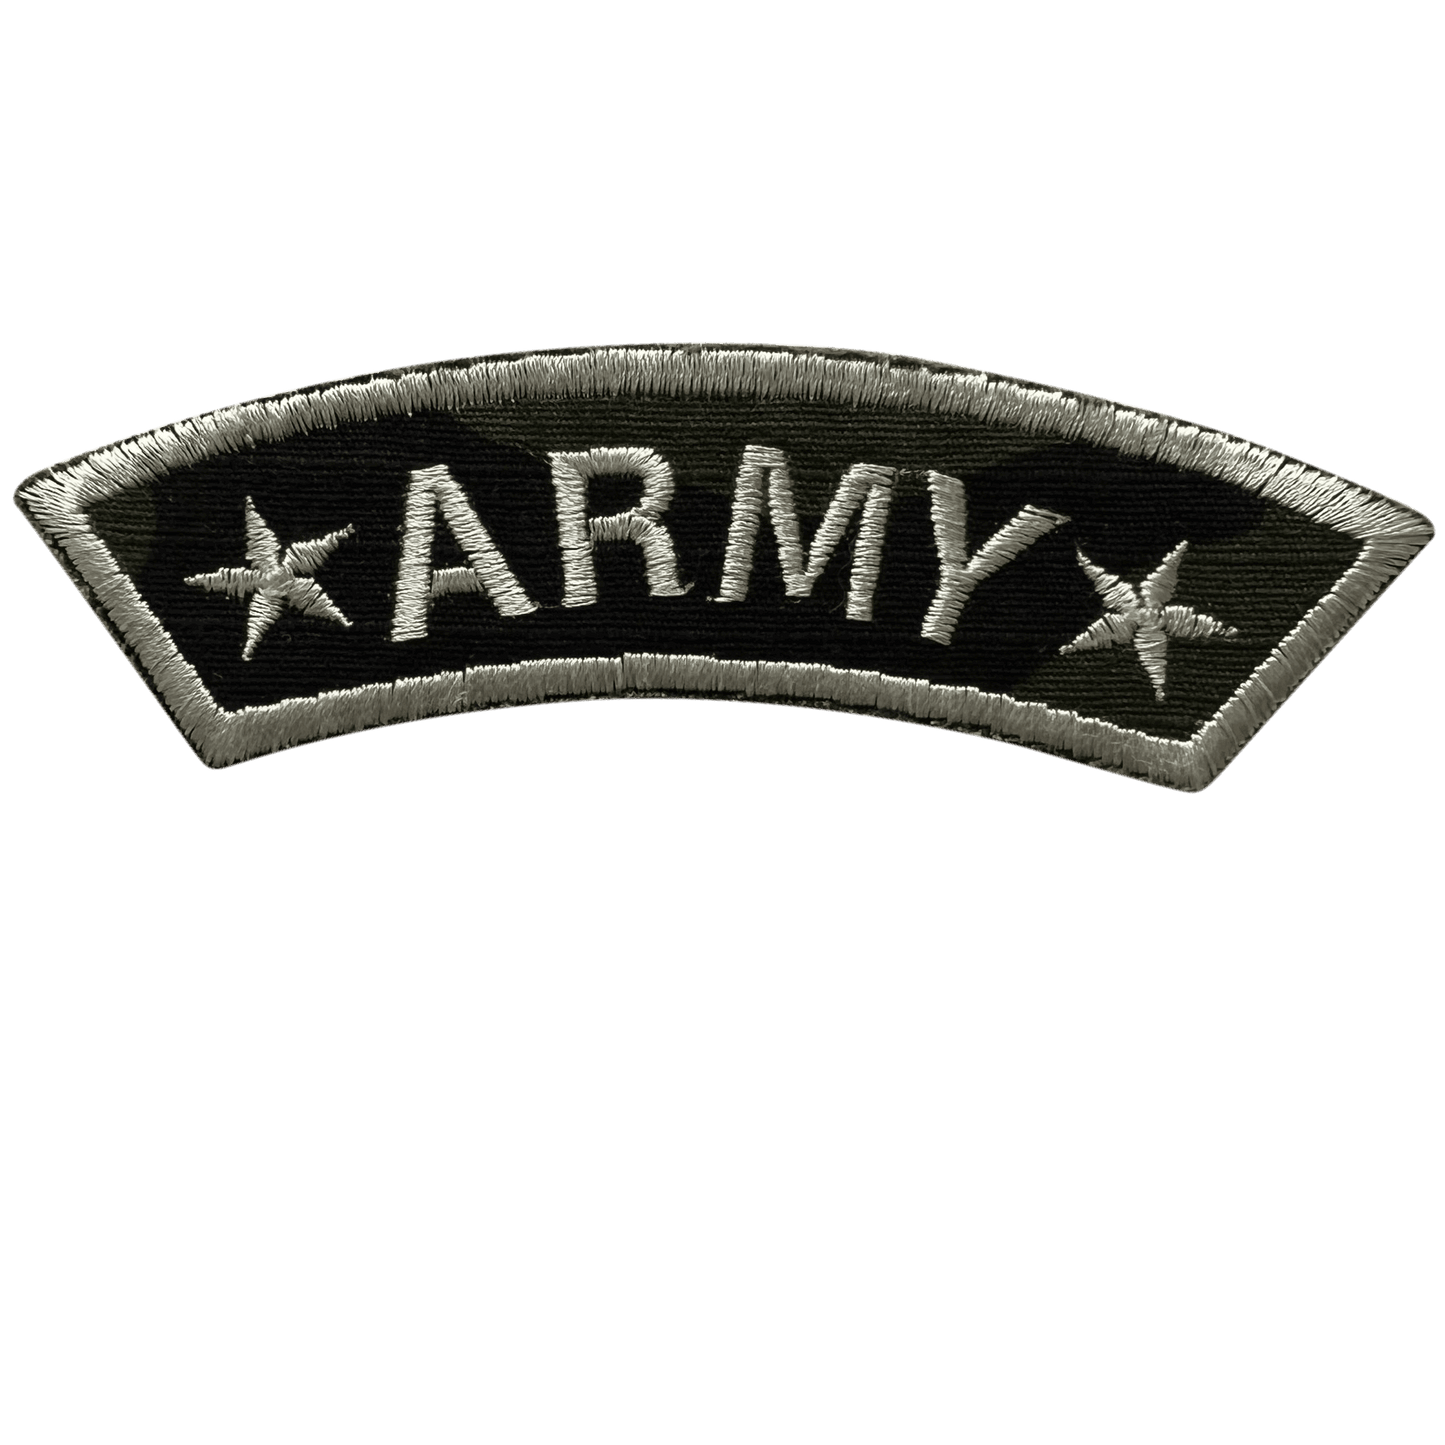 ARMY Patch Iron Sew On Jacket Bag Clothes Stars Camo Military Embroidered Badge